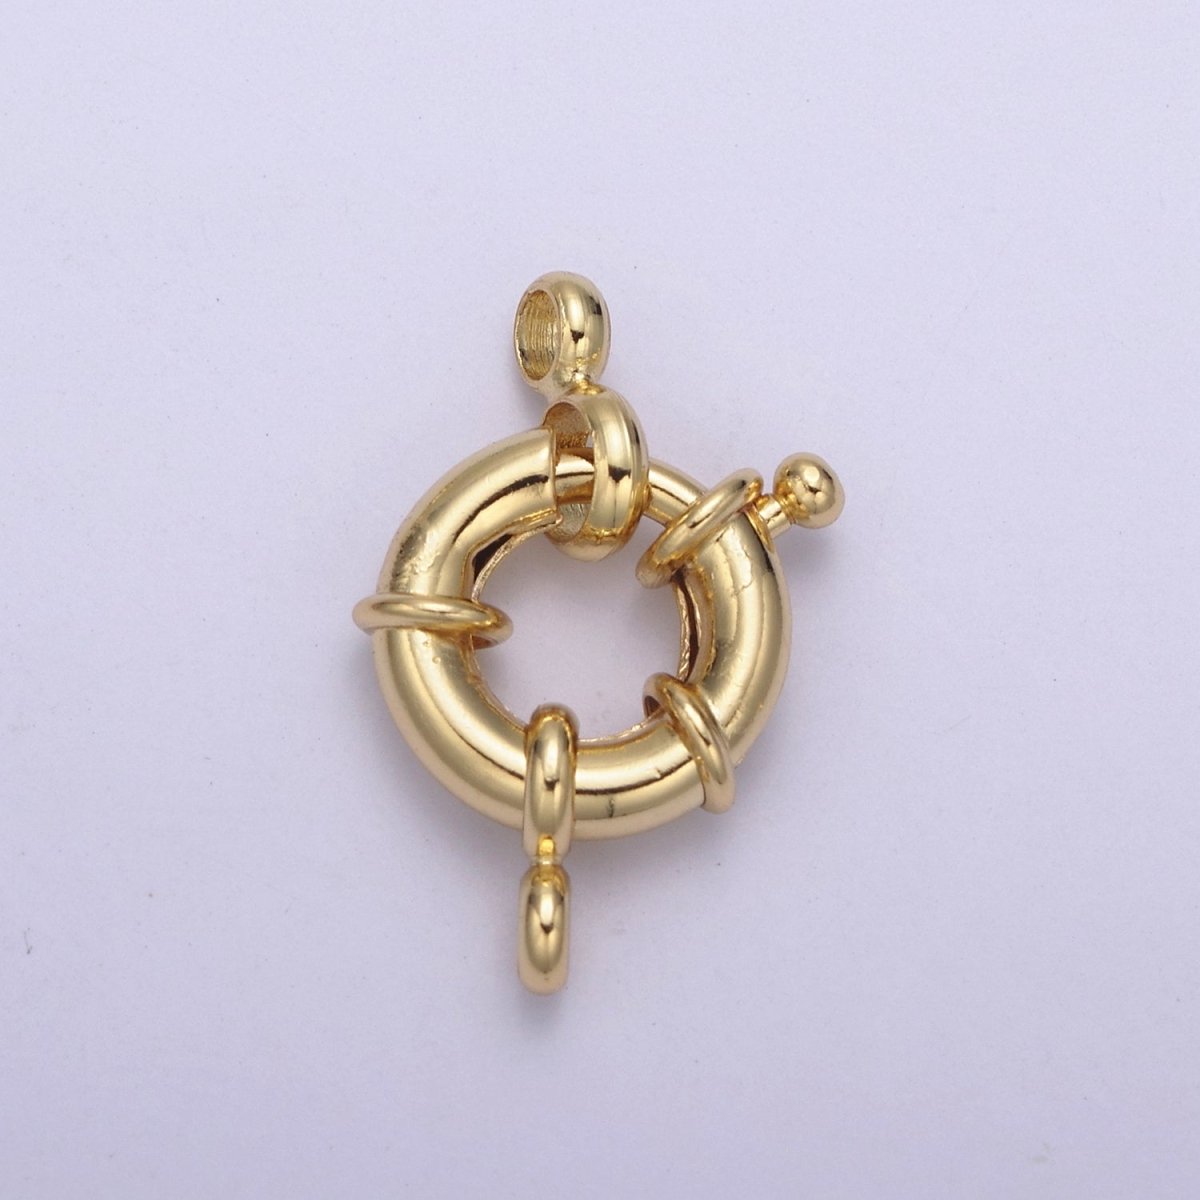 Sailor clasp, various sizes of 14K Gold Filled Wheel spring buckle for necklace bracelet jewelry Making Supply L-678 - DLUXCA